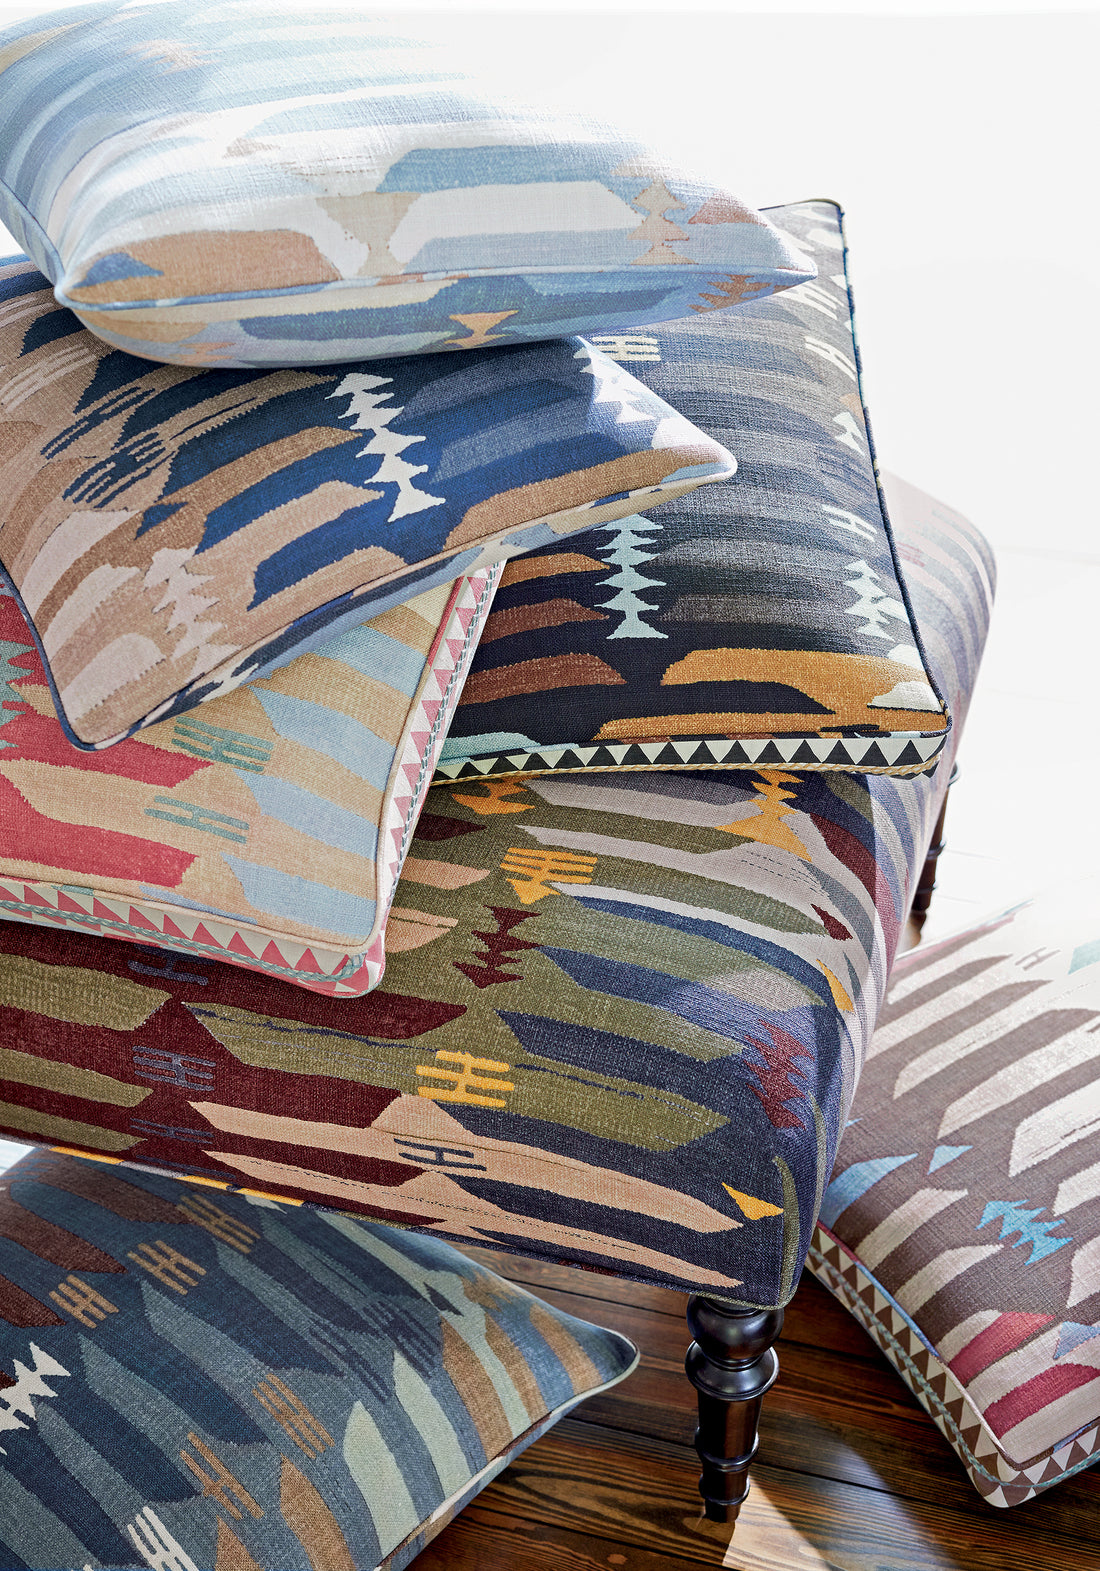 Baxter Ottoman and collection of Rio Grande printed fabric pillows featuring bluestone and moss color fabric - pattern number F913209 - by Thibaut in the Mesa collection